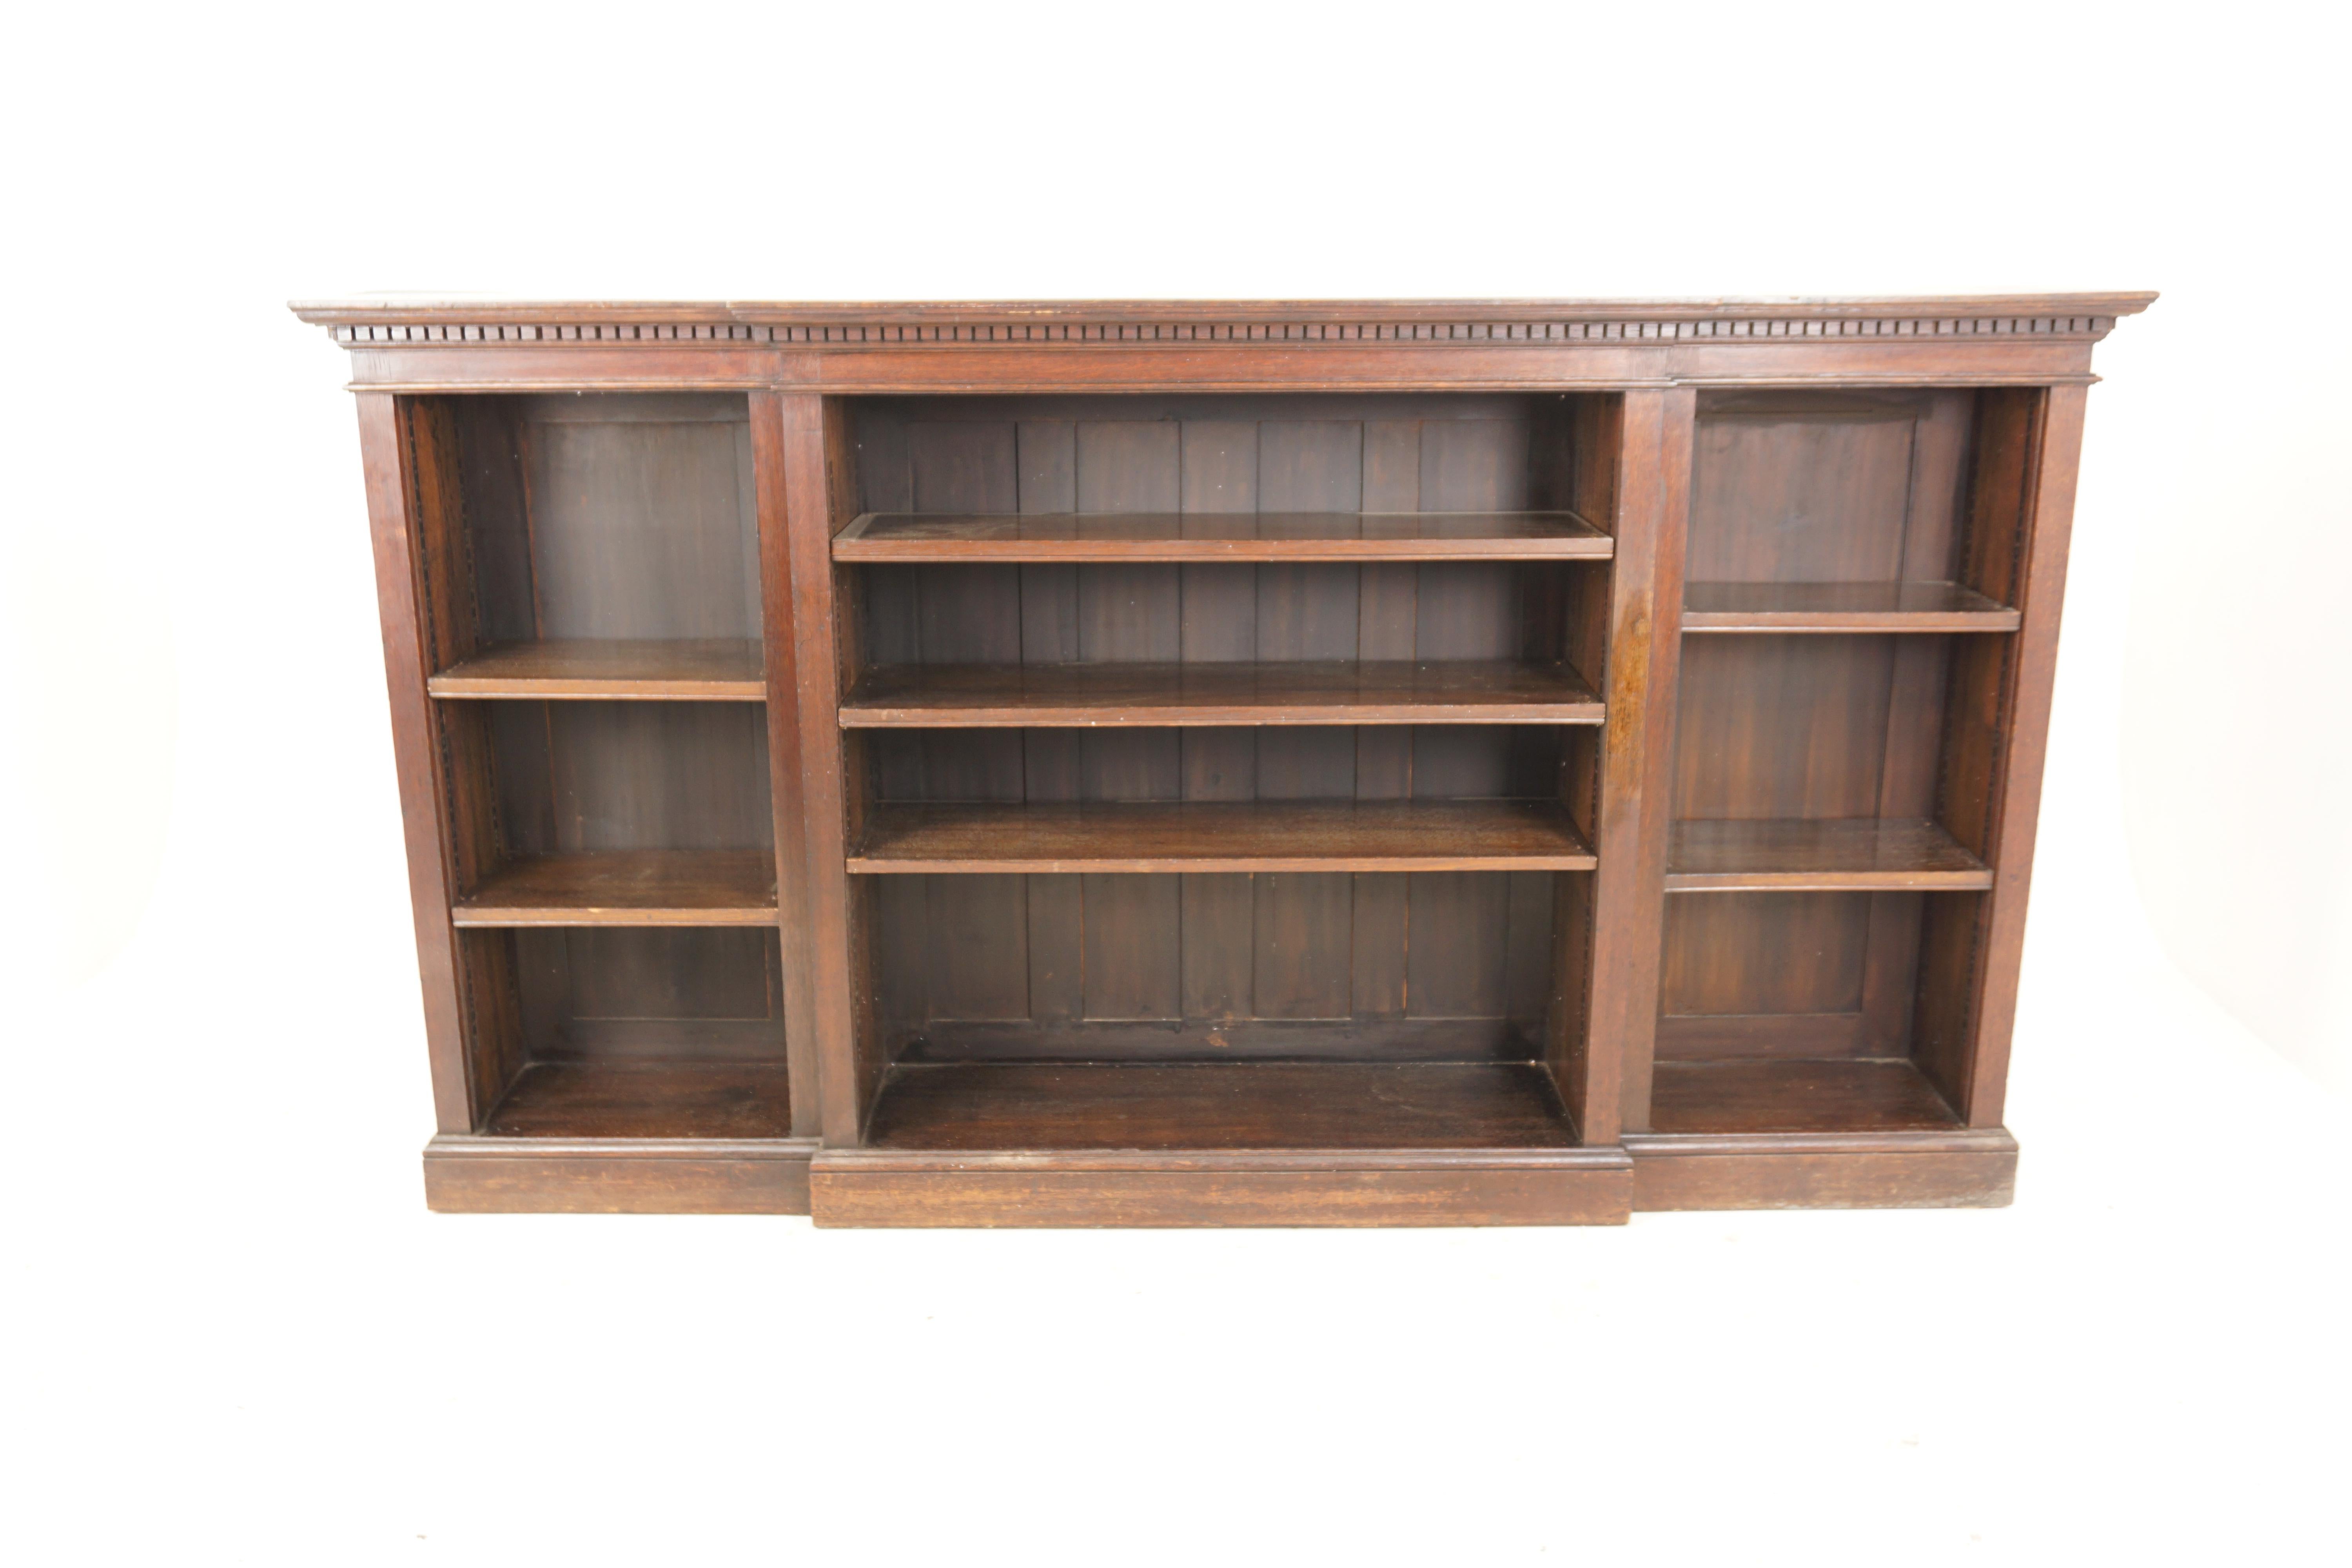 Antiques Arts + Crafts Oak Breakfast Open Bookcase Display Cabinet, Scotland 1910, H636

Scotland 1910
Solid Oak
Original Finish
Rectangular moulded top with dentil frieze below three sections. Each one fitted with central Breakfront with three